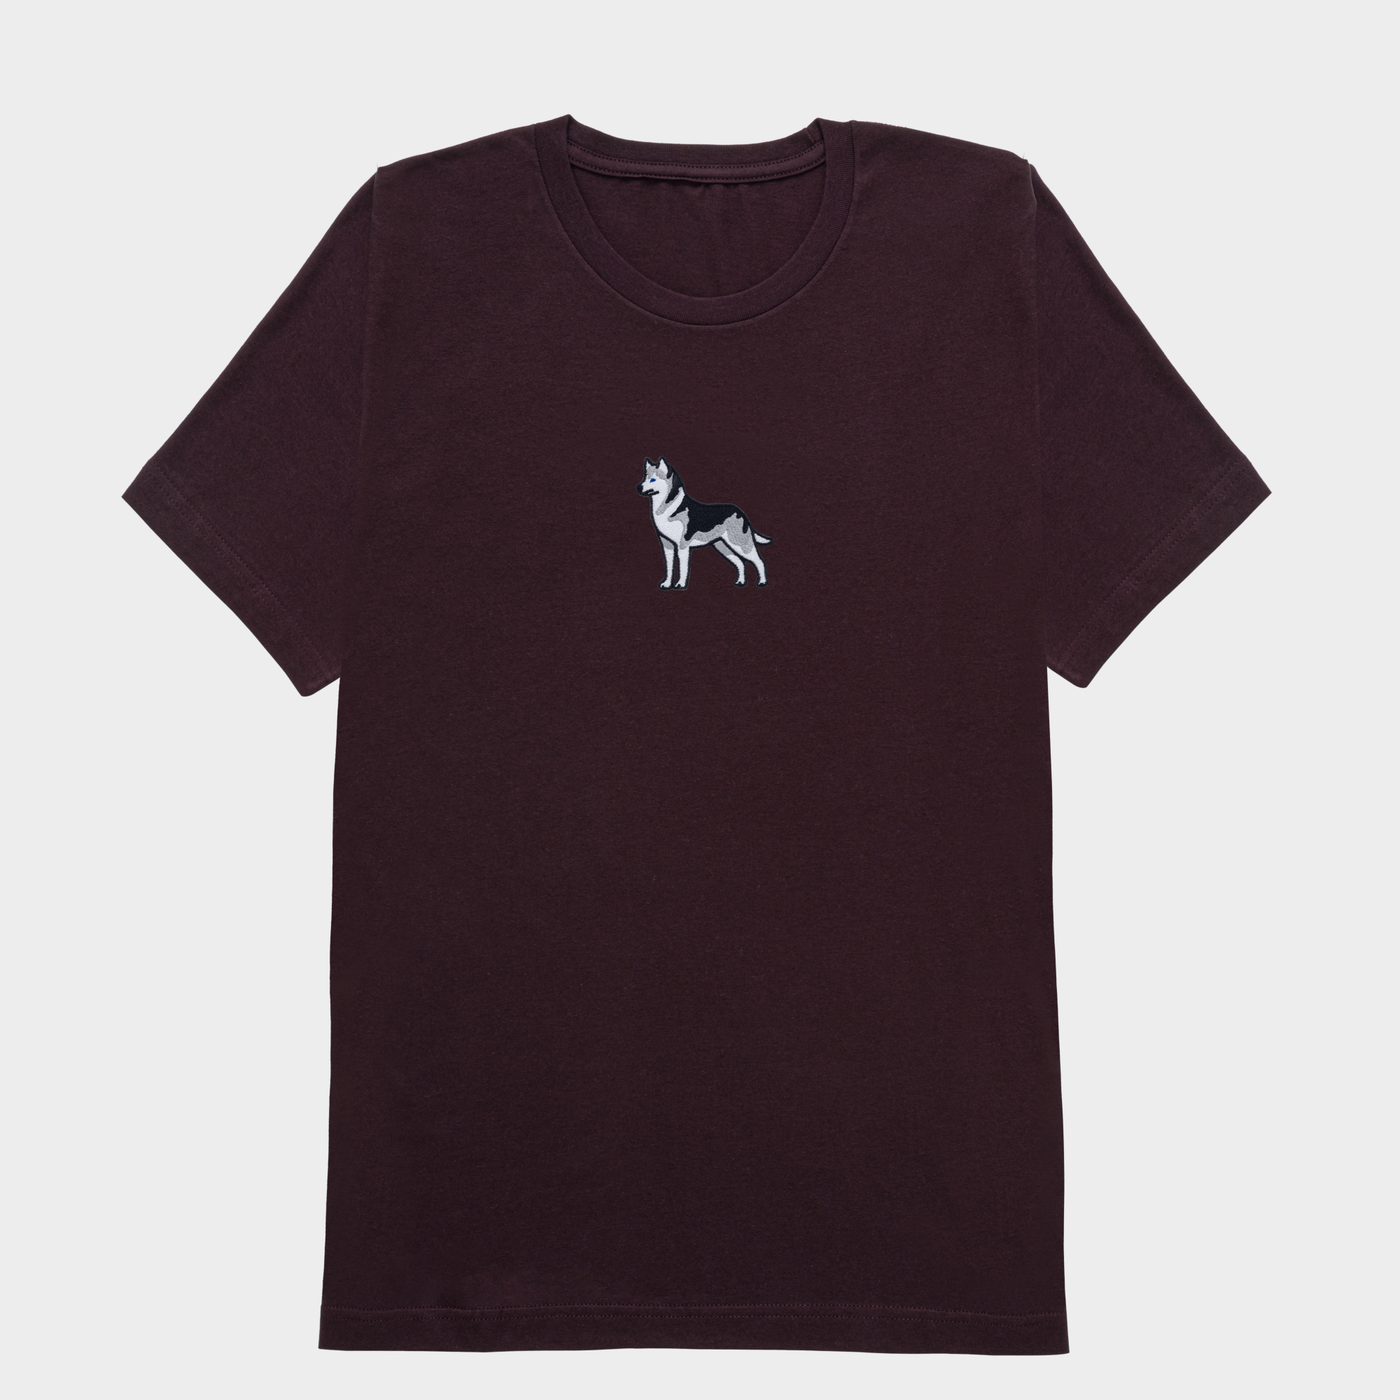 Bobby's Planet Men's Embroidered Siberian Husky T-Shirt from Paws Dog Cat Animals Collection in Oxblood Color#color_oxblood